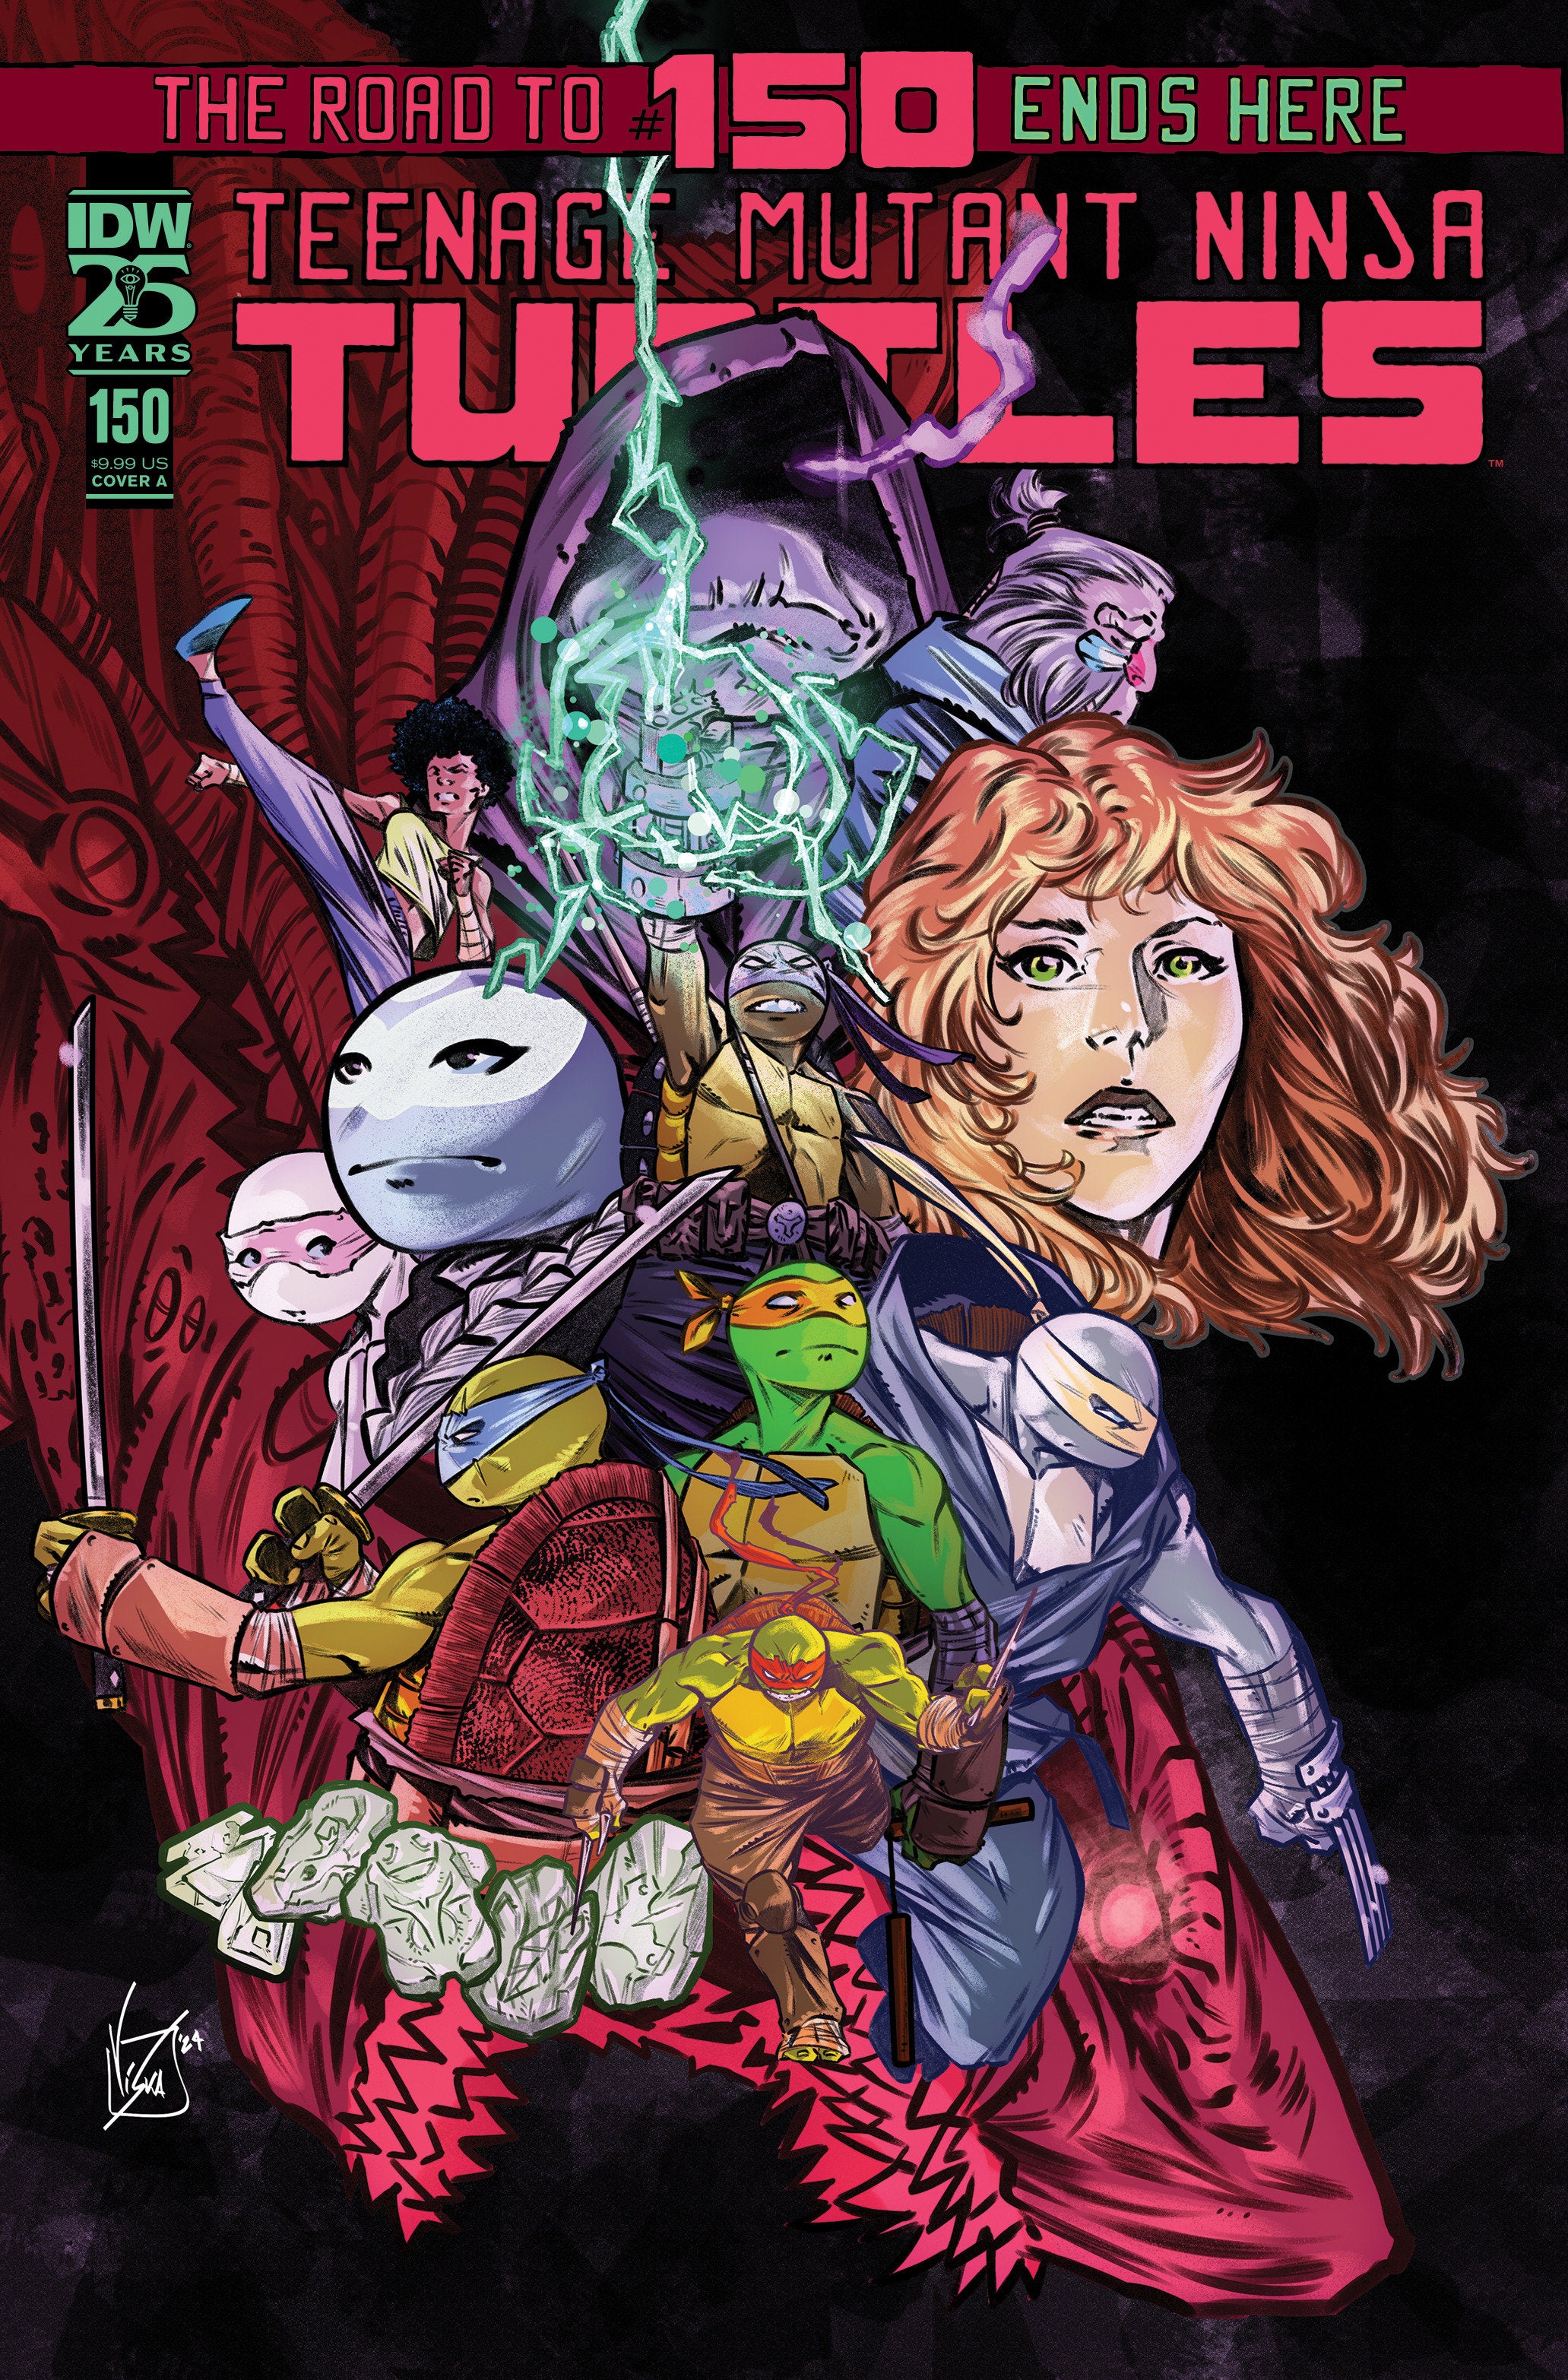 Teenage Mutant Ninja Turtles #150 Cover A (Federici) | Game Master's Emporium (The New GME)